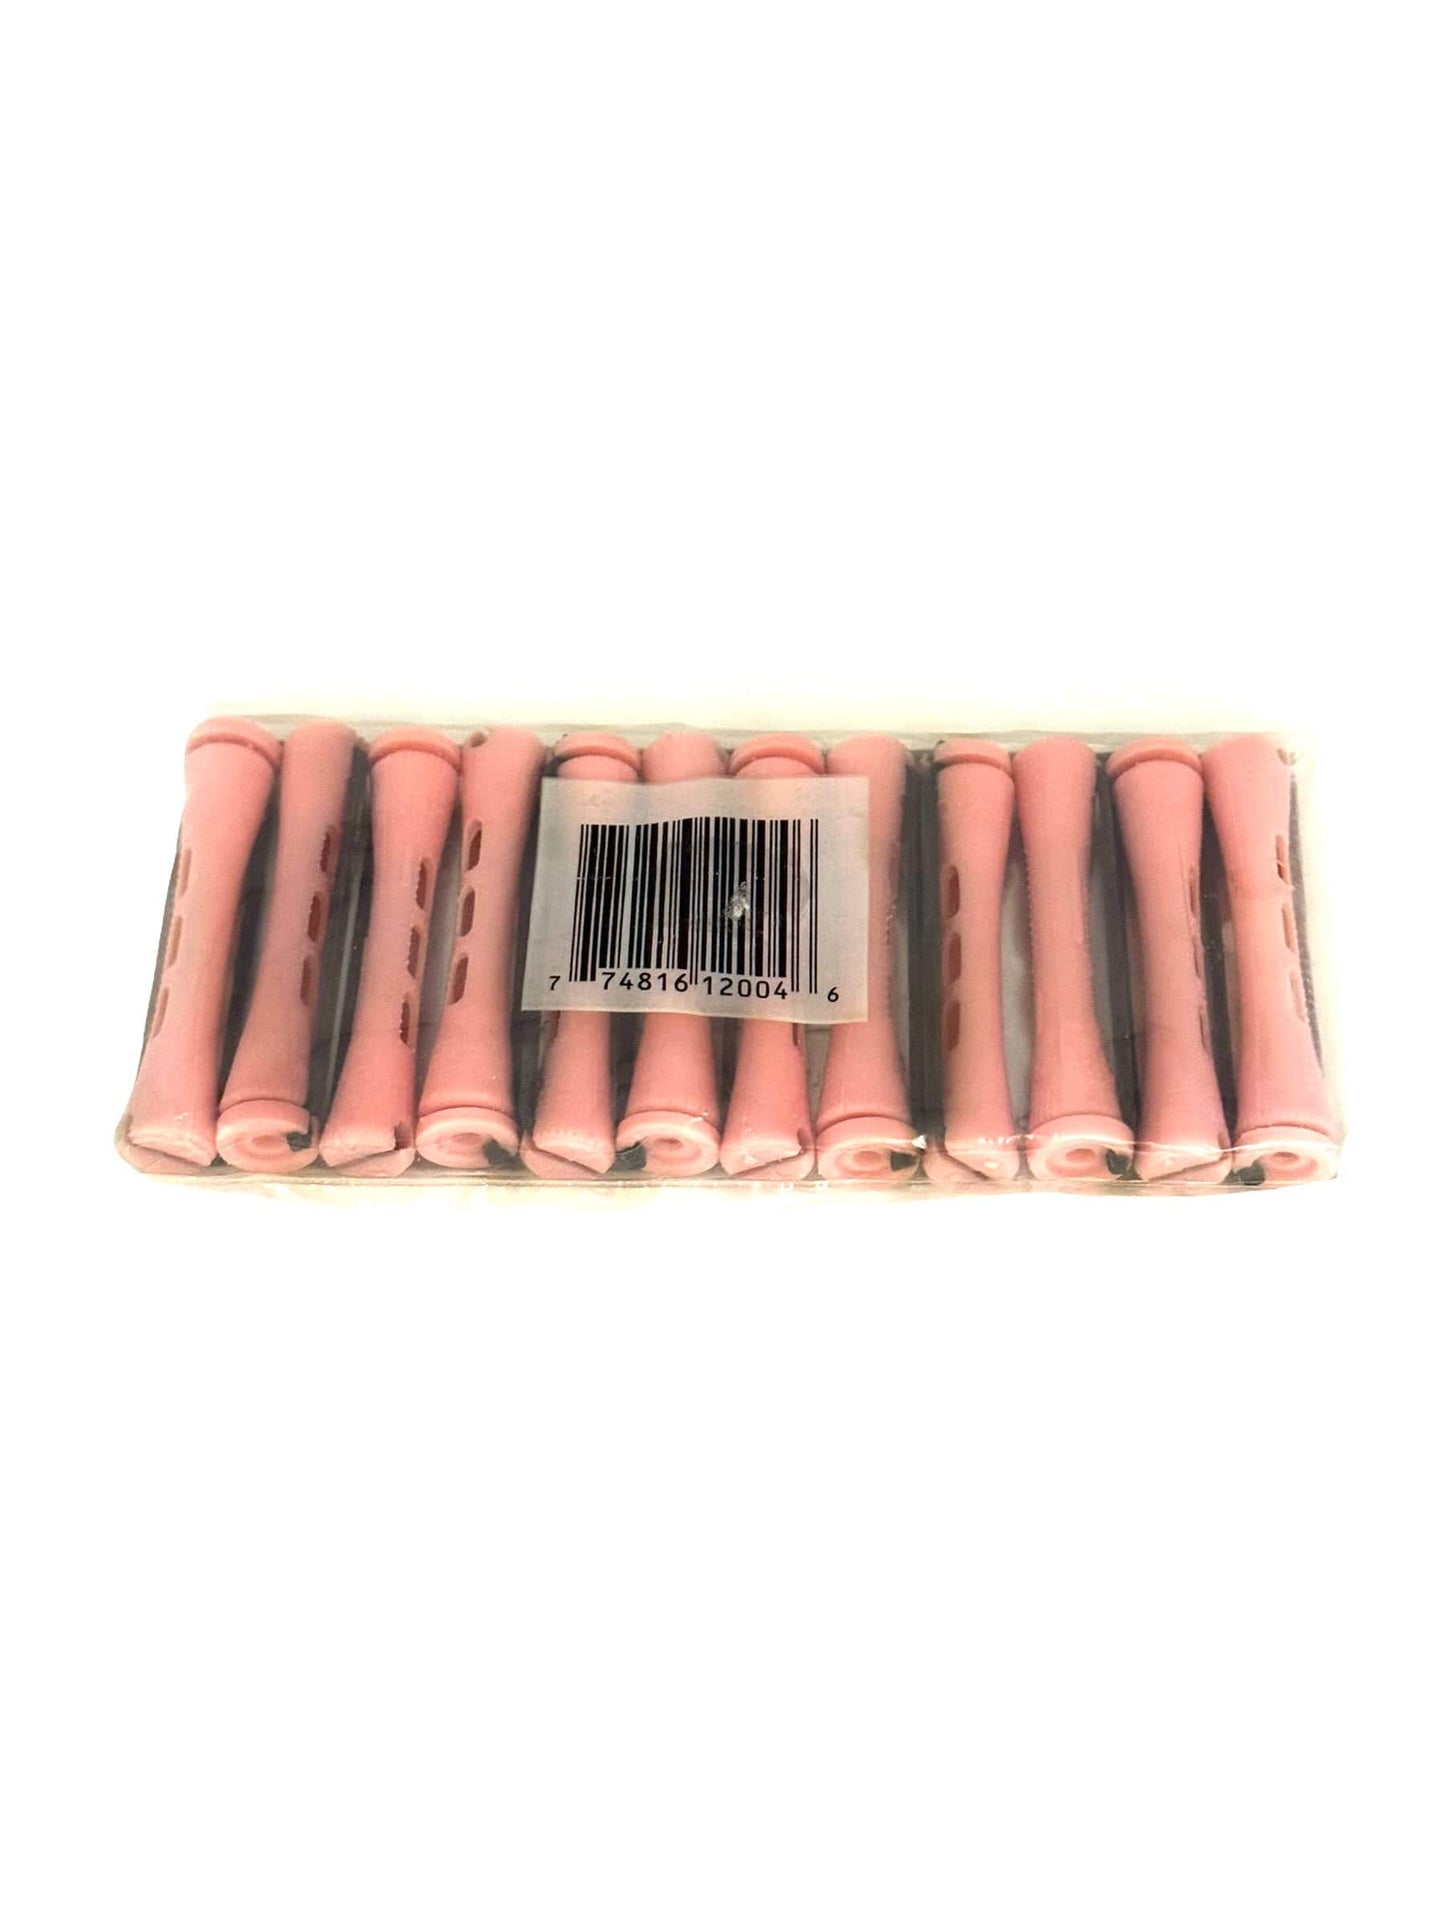 Perm Rods Solo Hair Rollers Variety Colors & Sizes Perm Rods